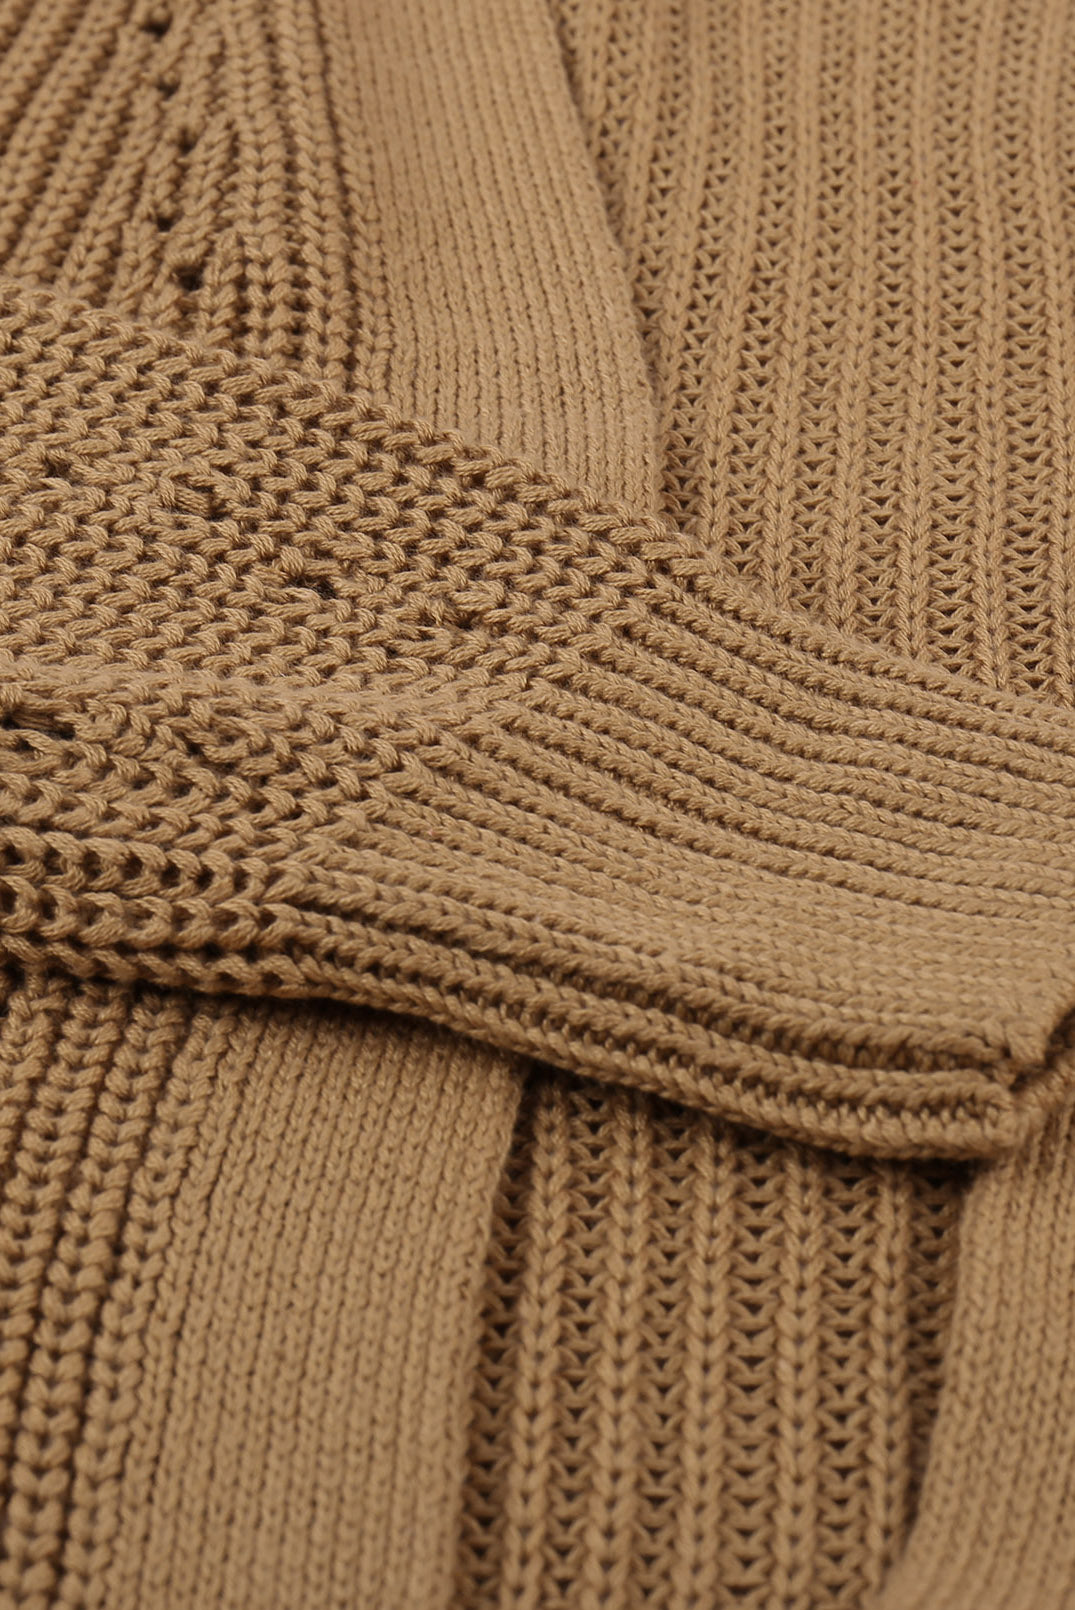 Apricot Drop Sleeve Slits Cable Knit Cardigan